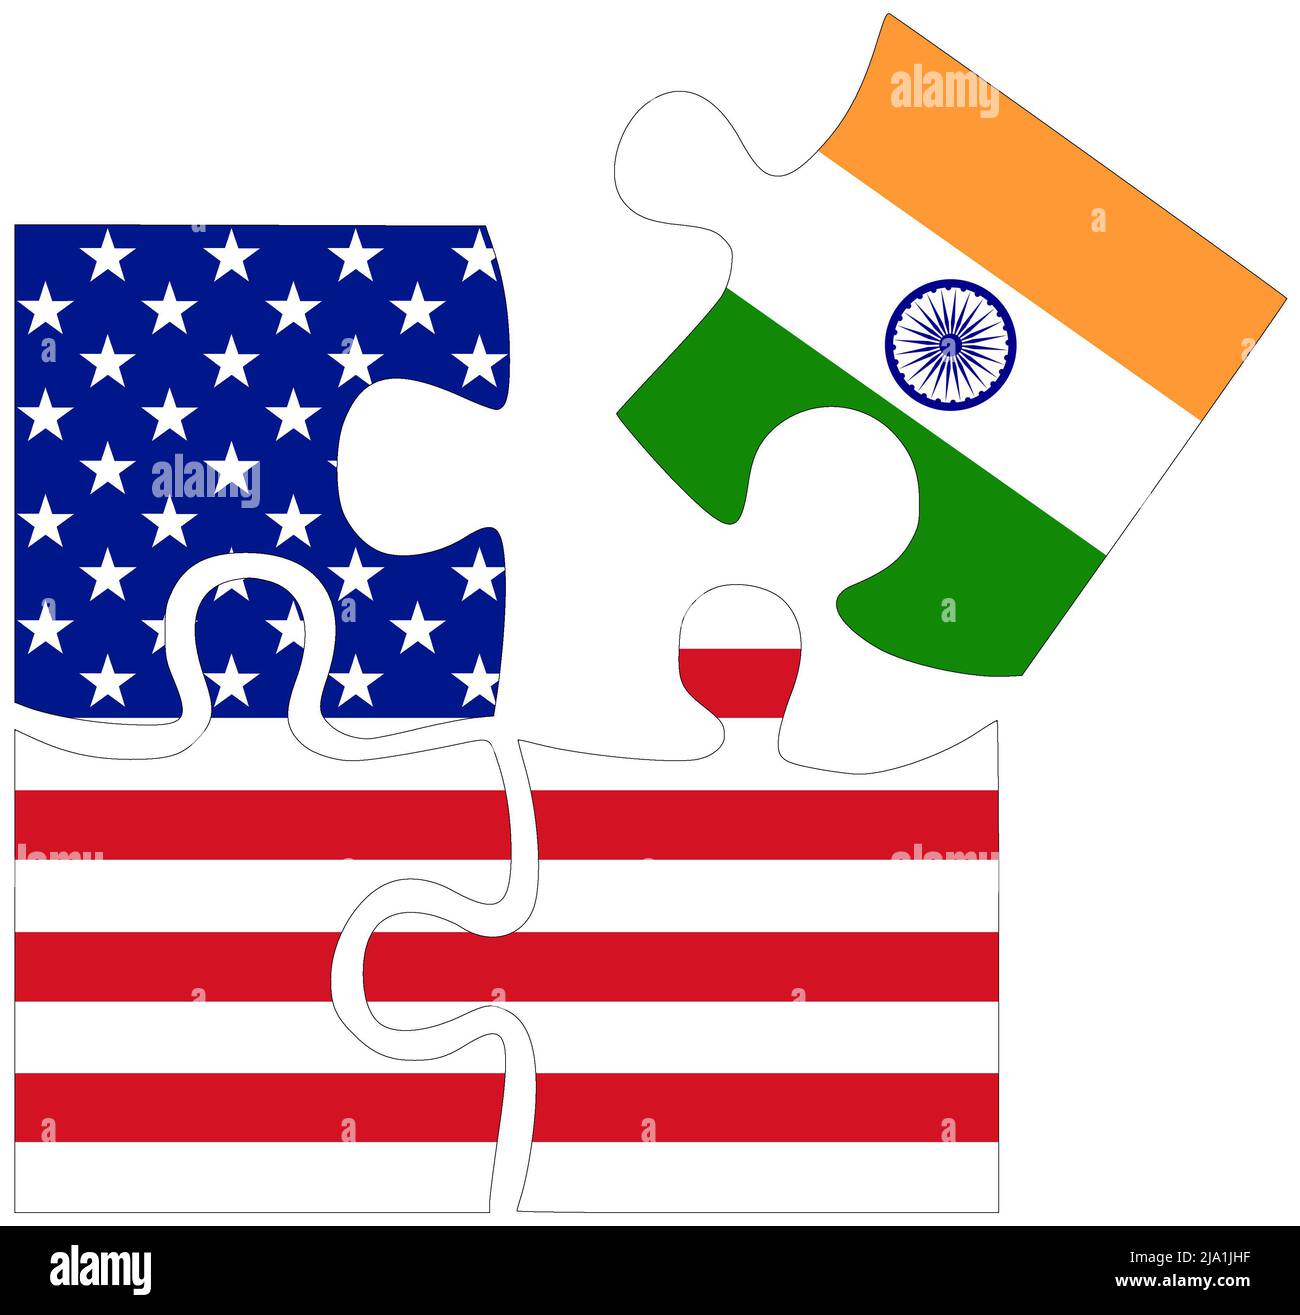 USA - India : puzzle shapes with flags, symbol of agreement or friendship Stock Photo